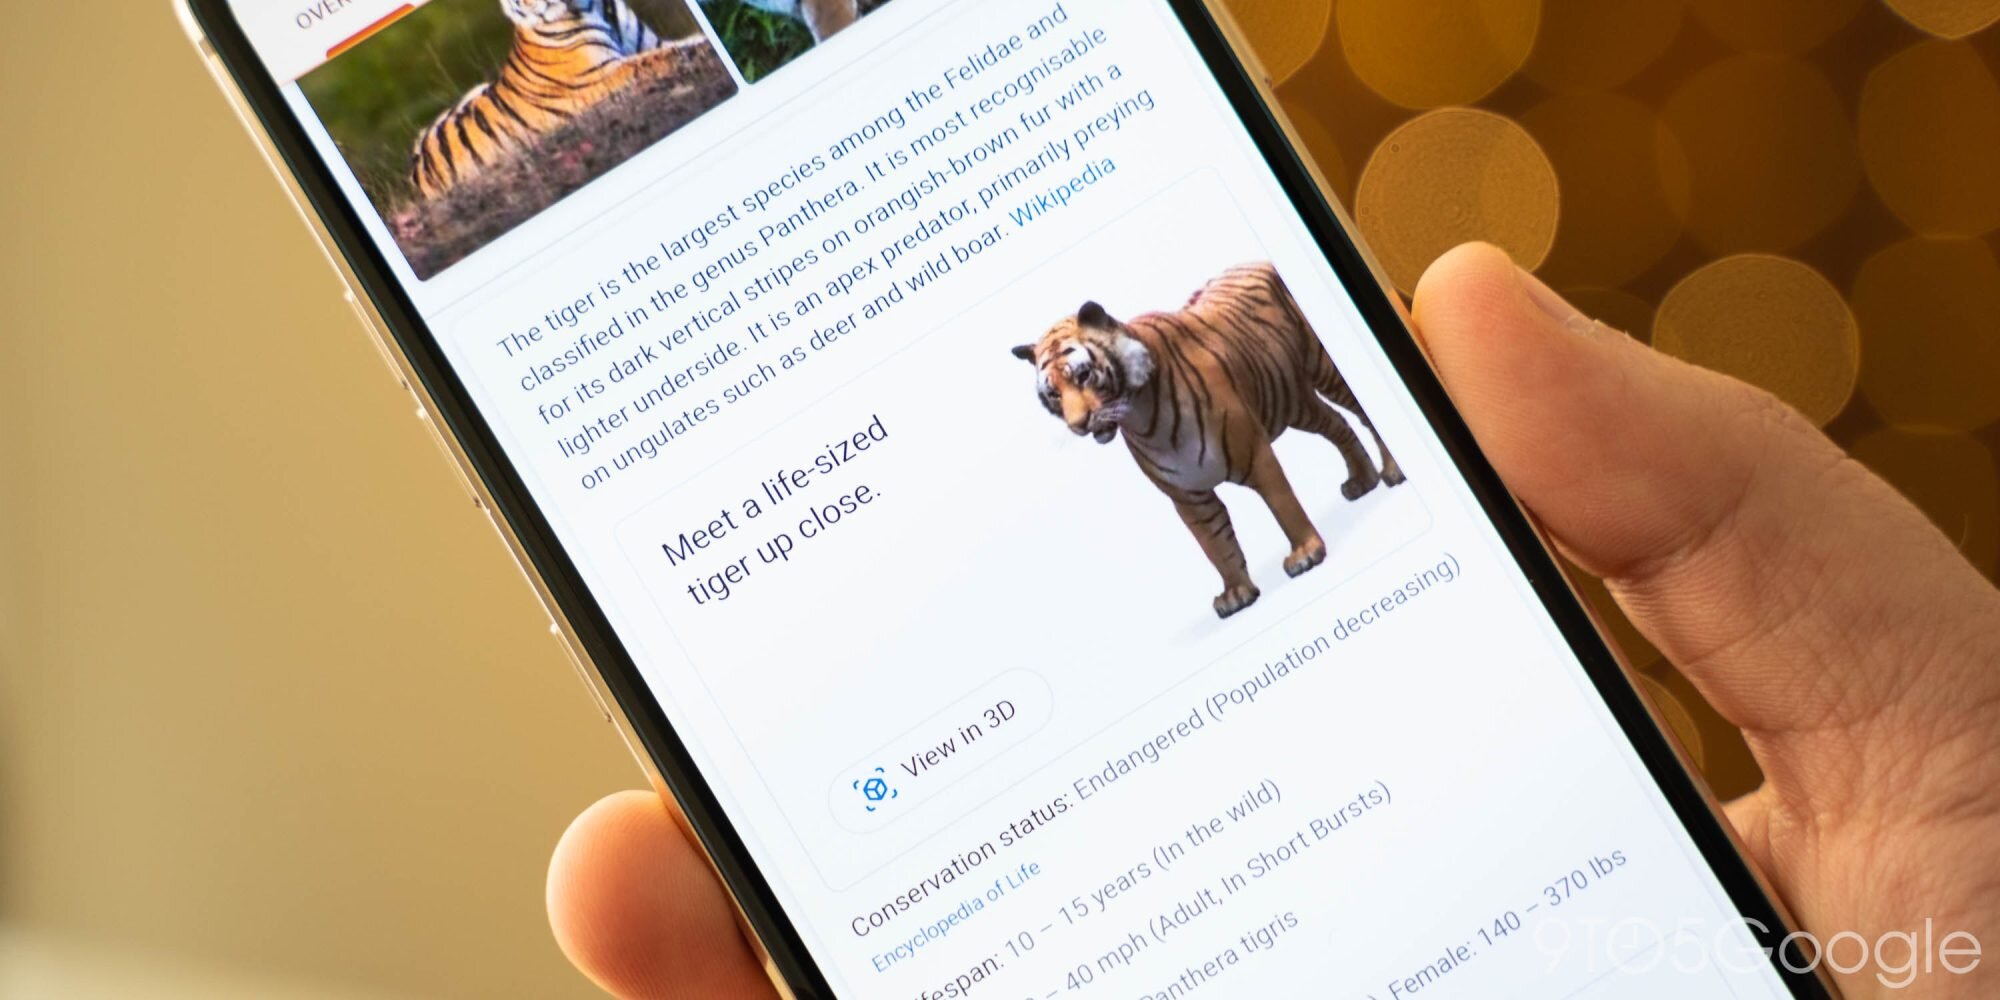 Google 3D animals and objects: Which ones are available and how to